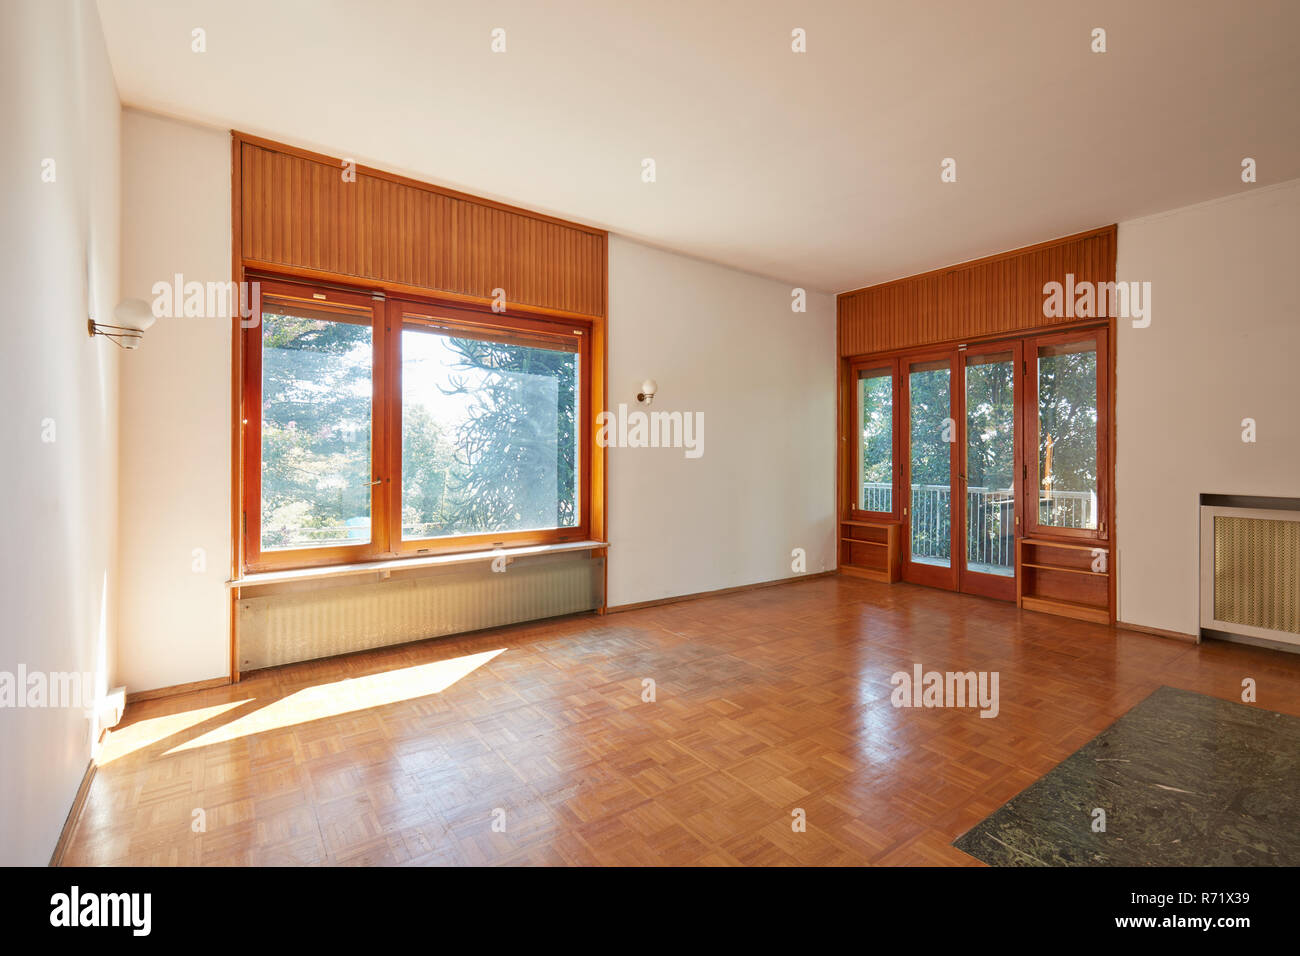 Old room, living room interior in old house with garden, wooden floor Stock Photo